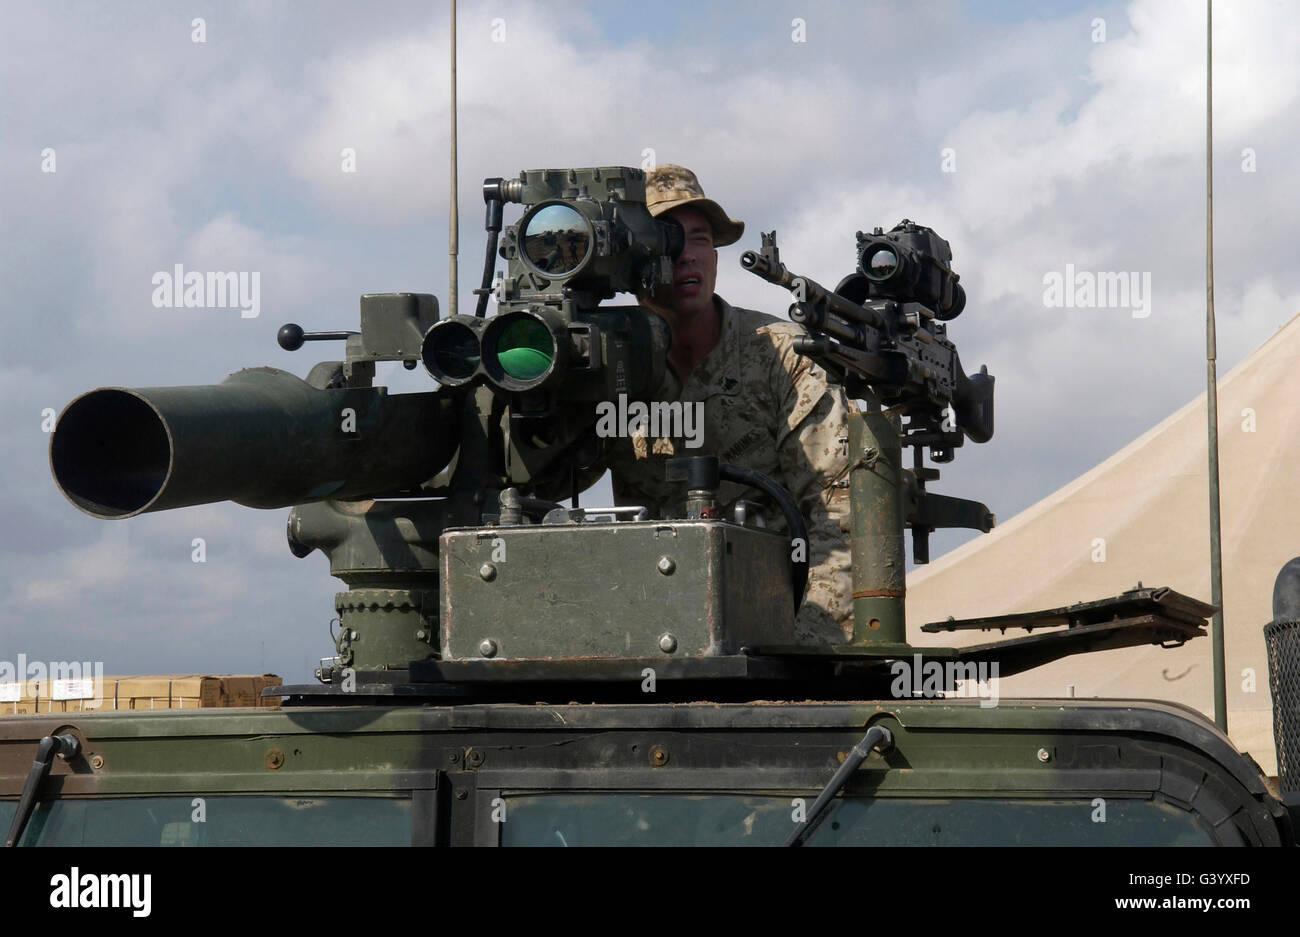 U.S Marine looks through a sight on a Tow Missile mounted on top of a humvee. Stock Photo